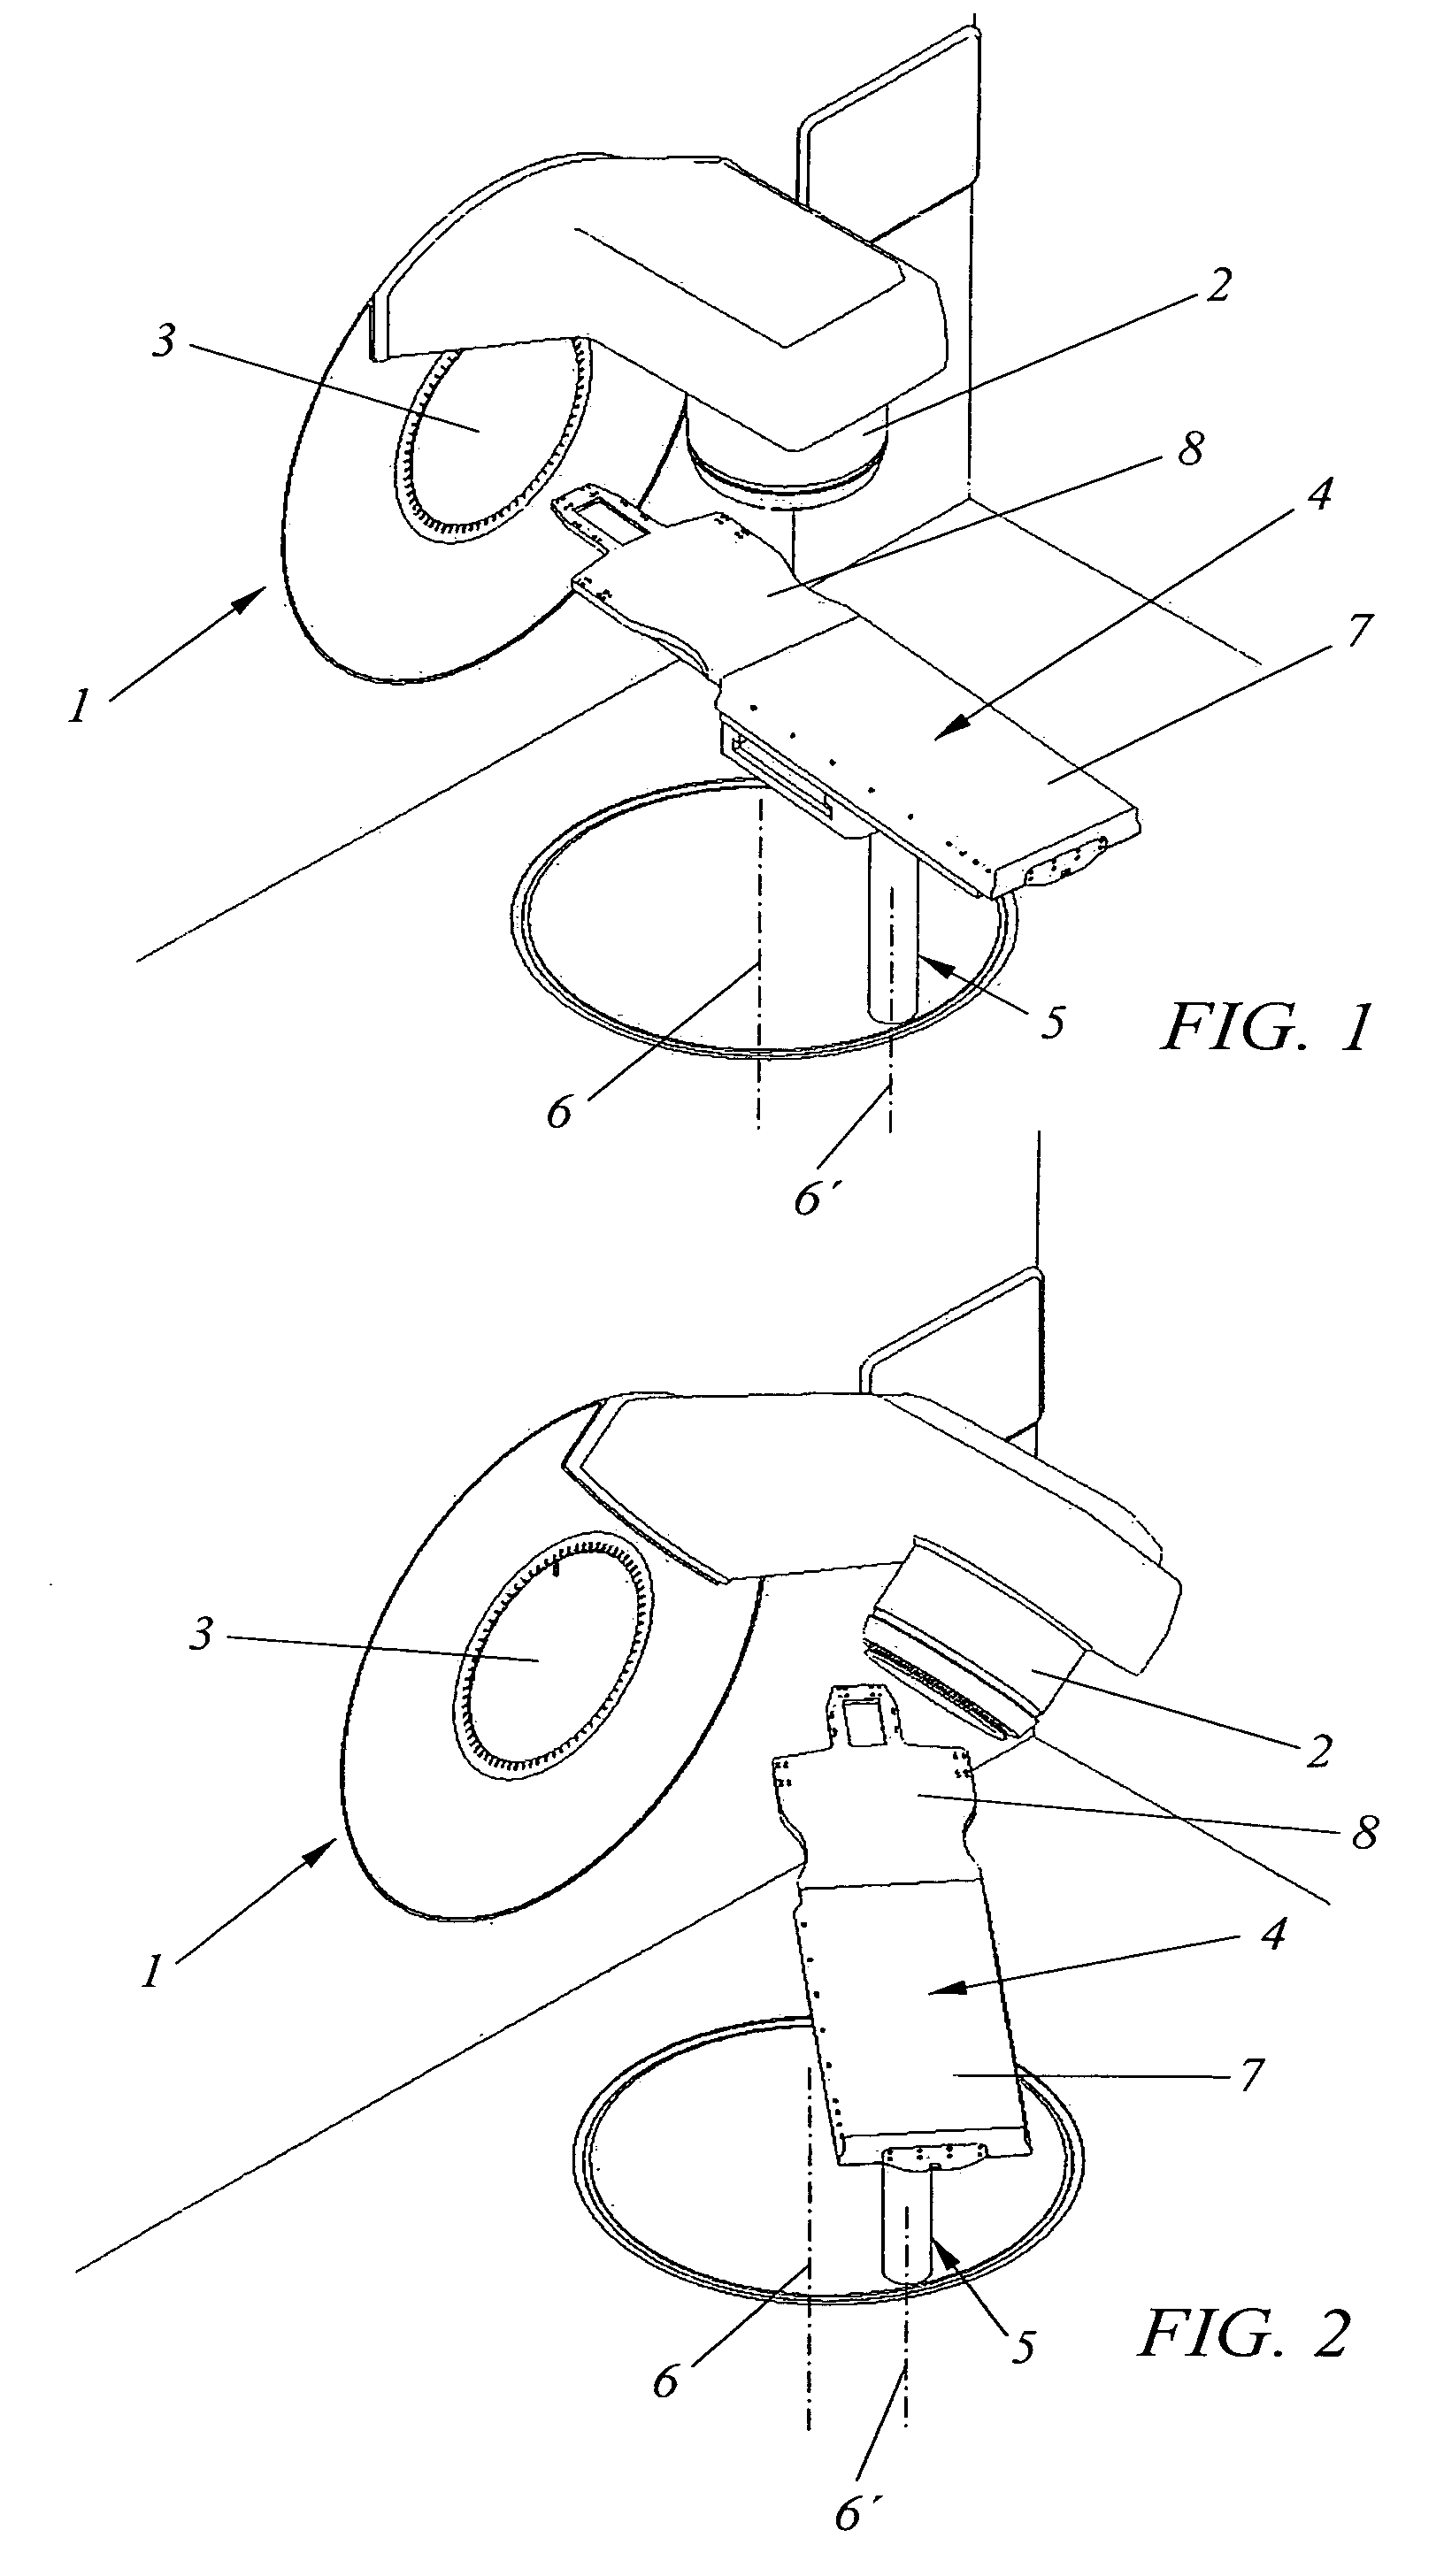 Modular patient support system for use in radiotherapy treatments